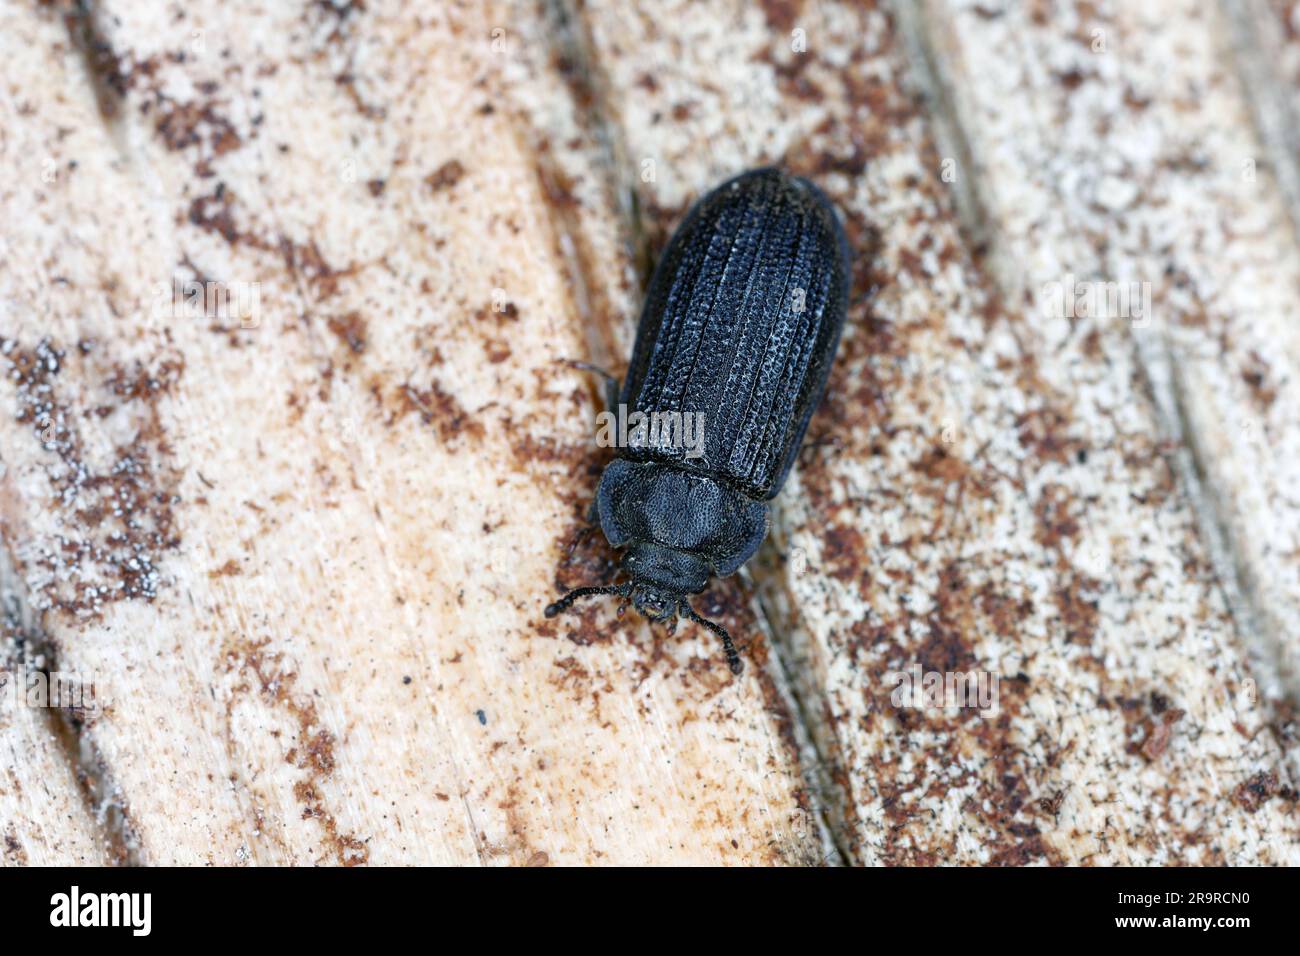 Grynocharis oblonga, a species of insect from family Bark-gnawing beetles (Trogossitidae). A predator that lives under the bark of dead trees. Stock Photo